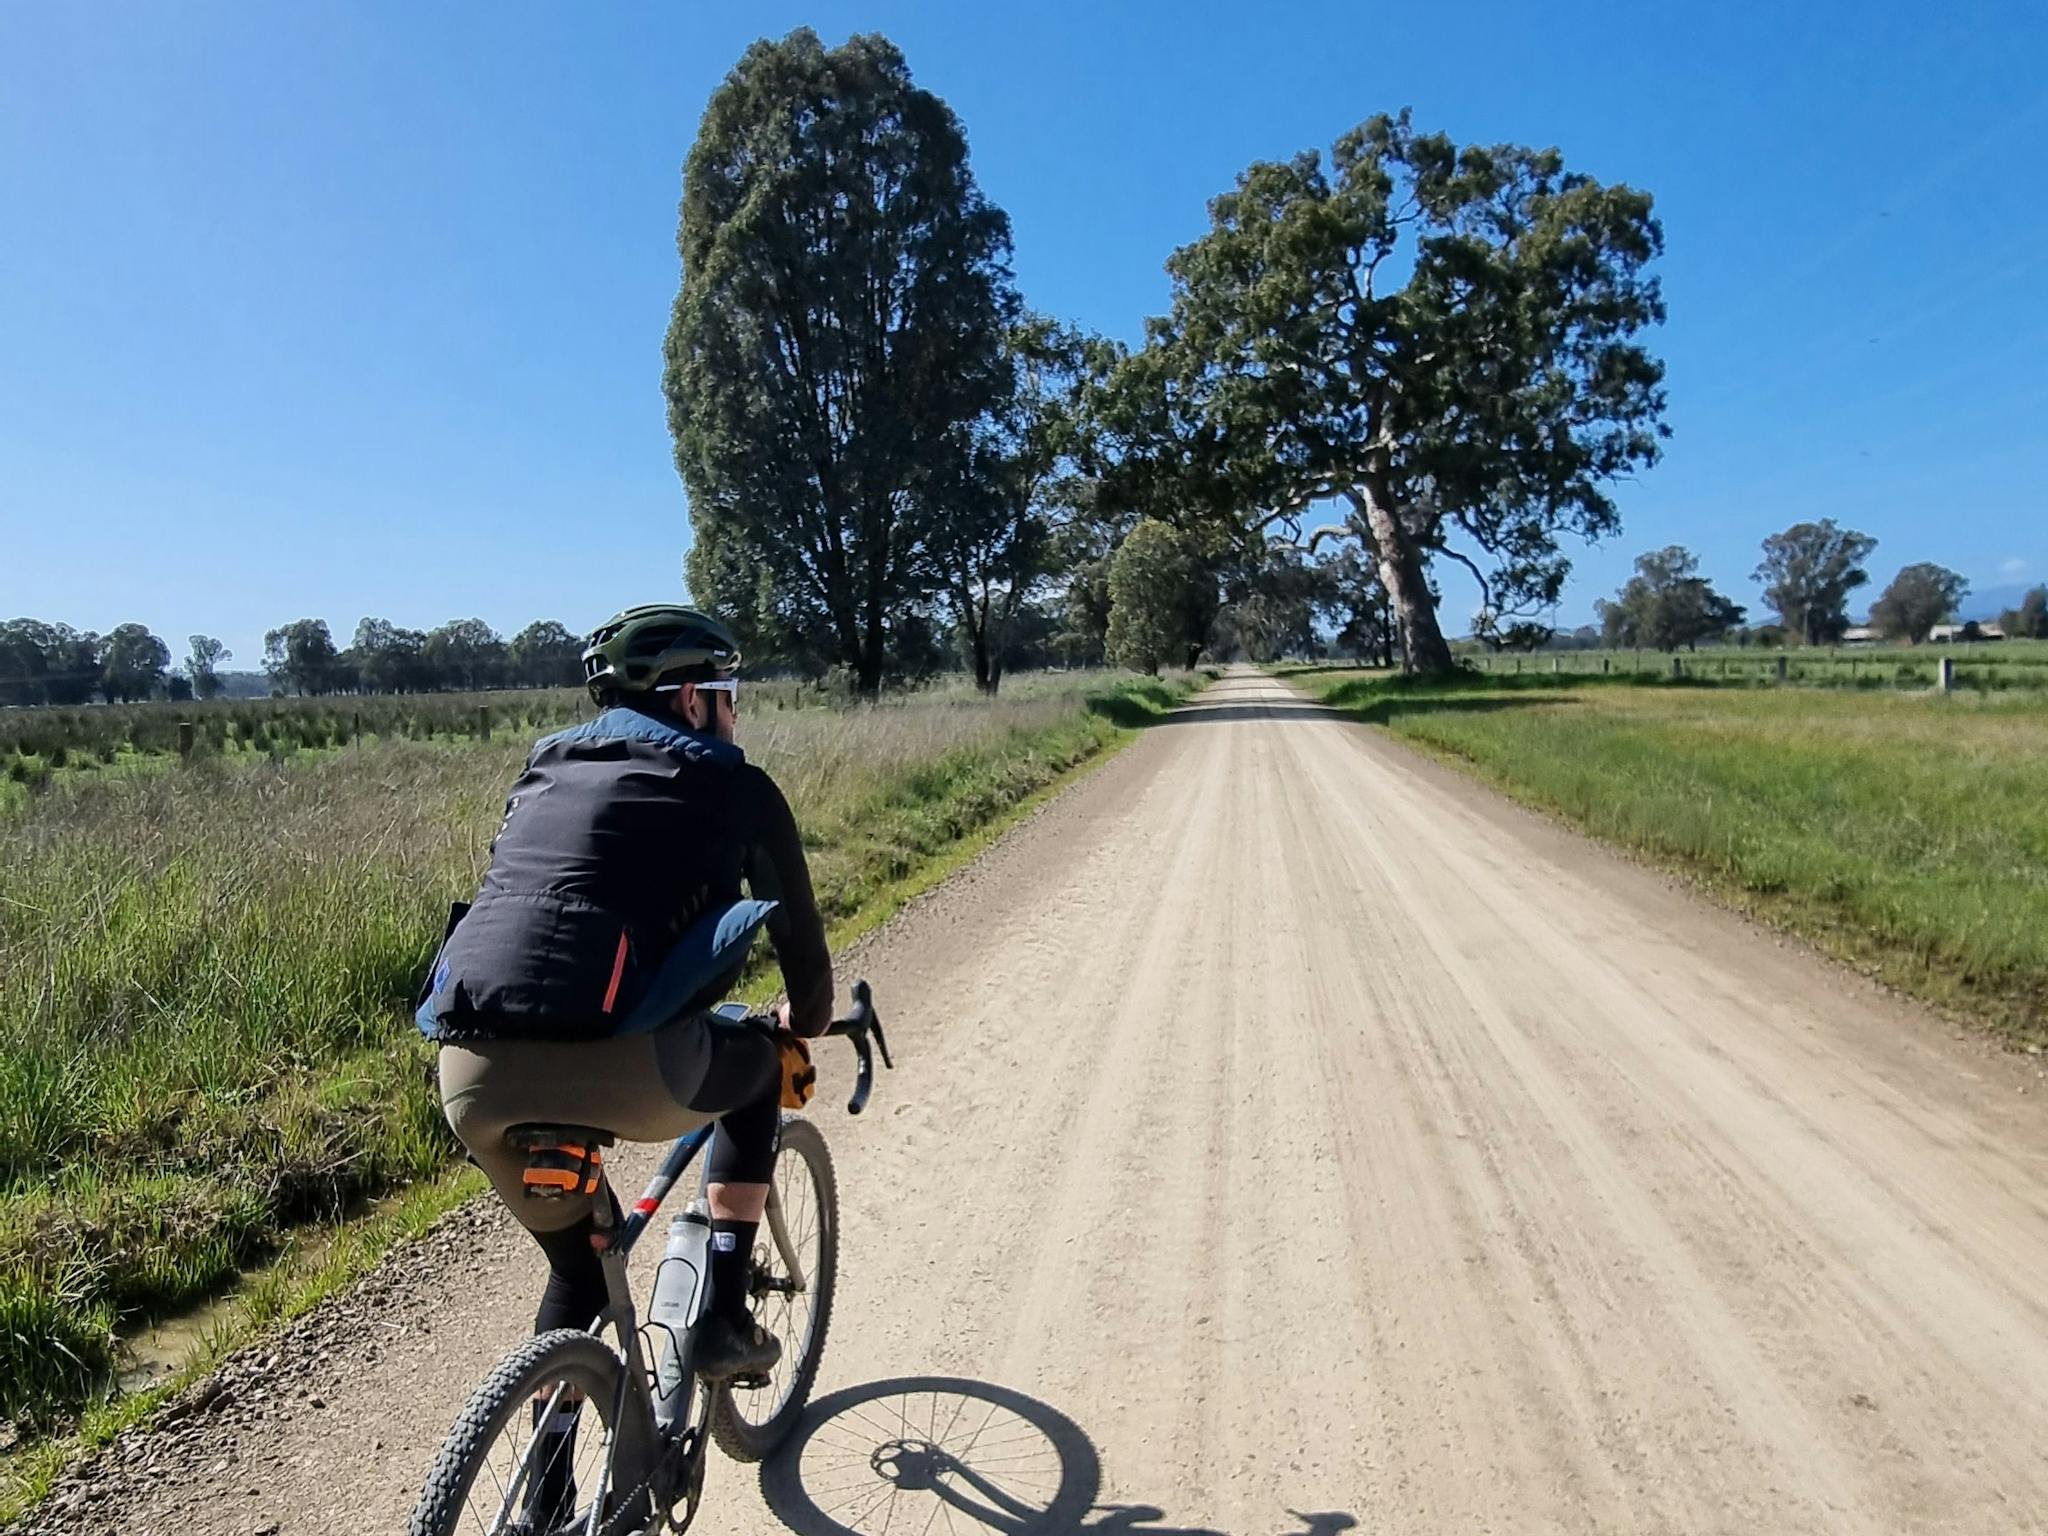 Cyclist in foreground on dull brown gravel road, grass, gum trees, blue sky